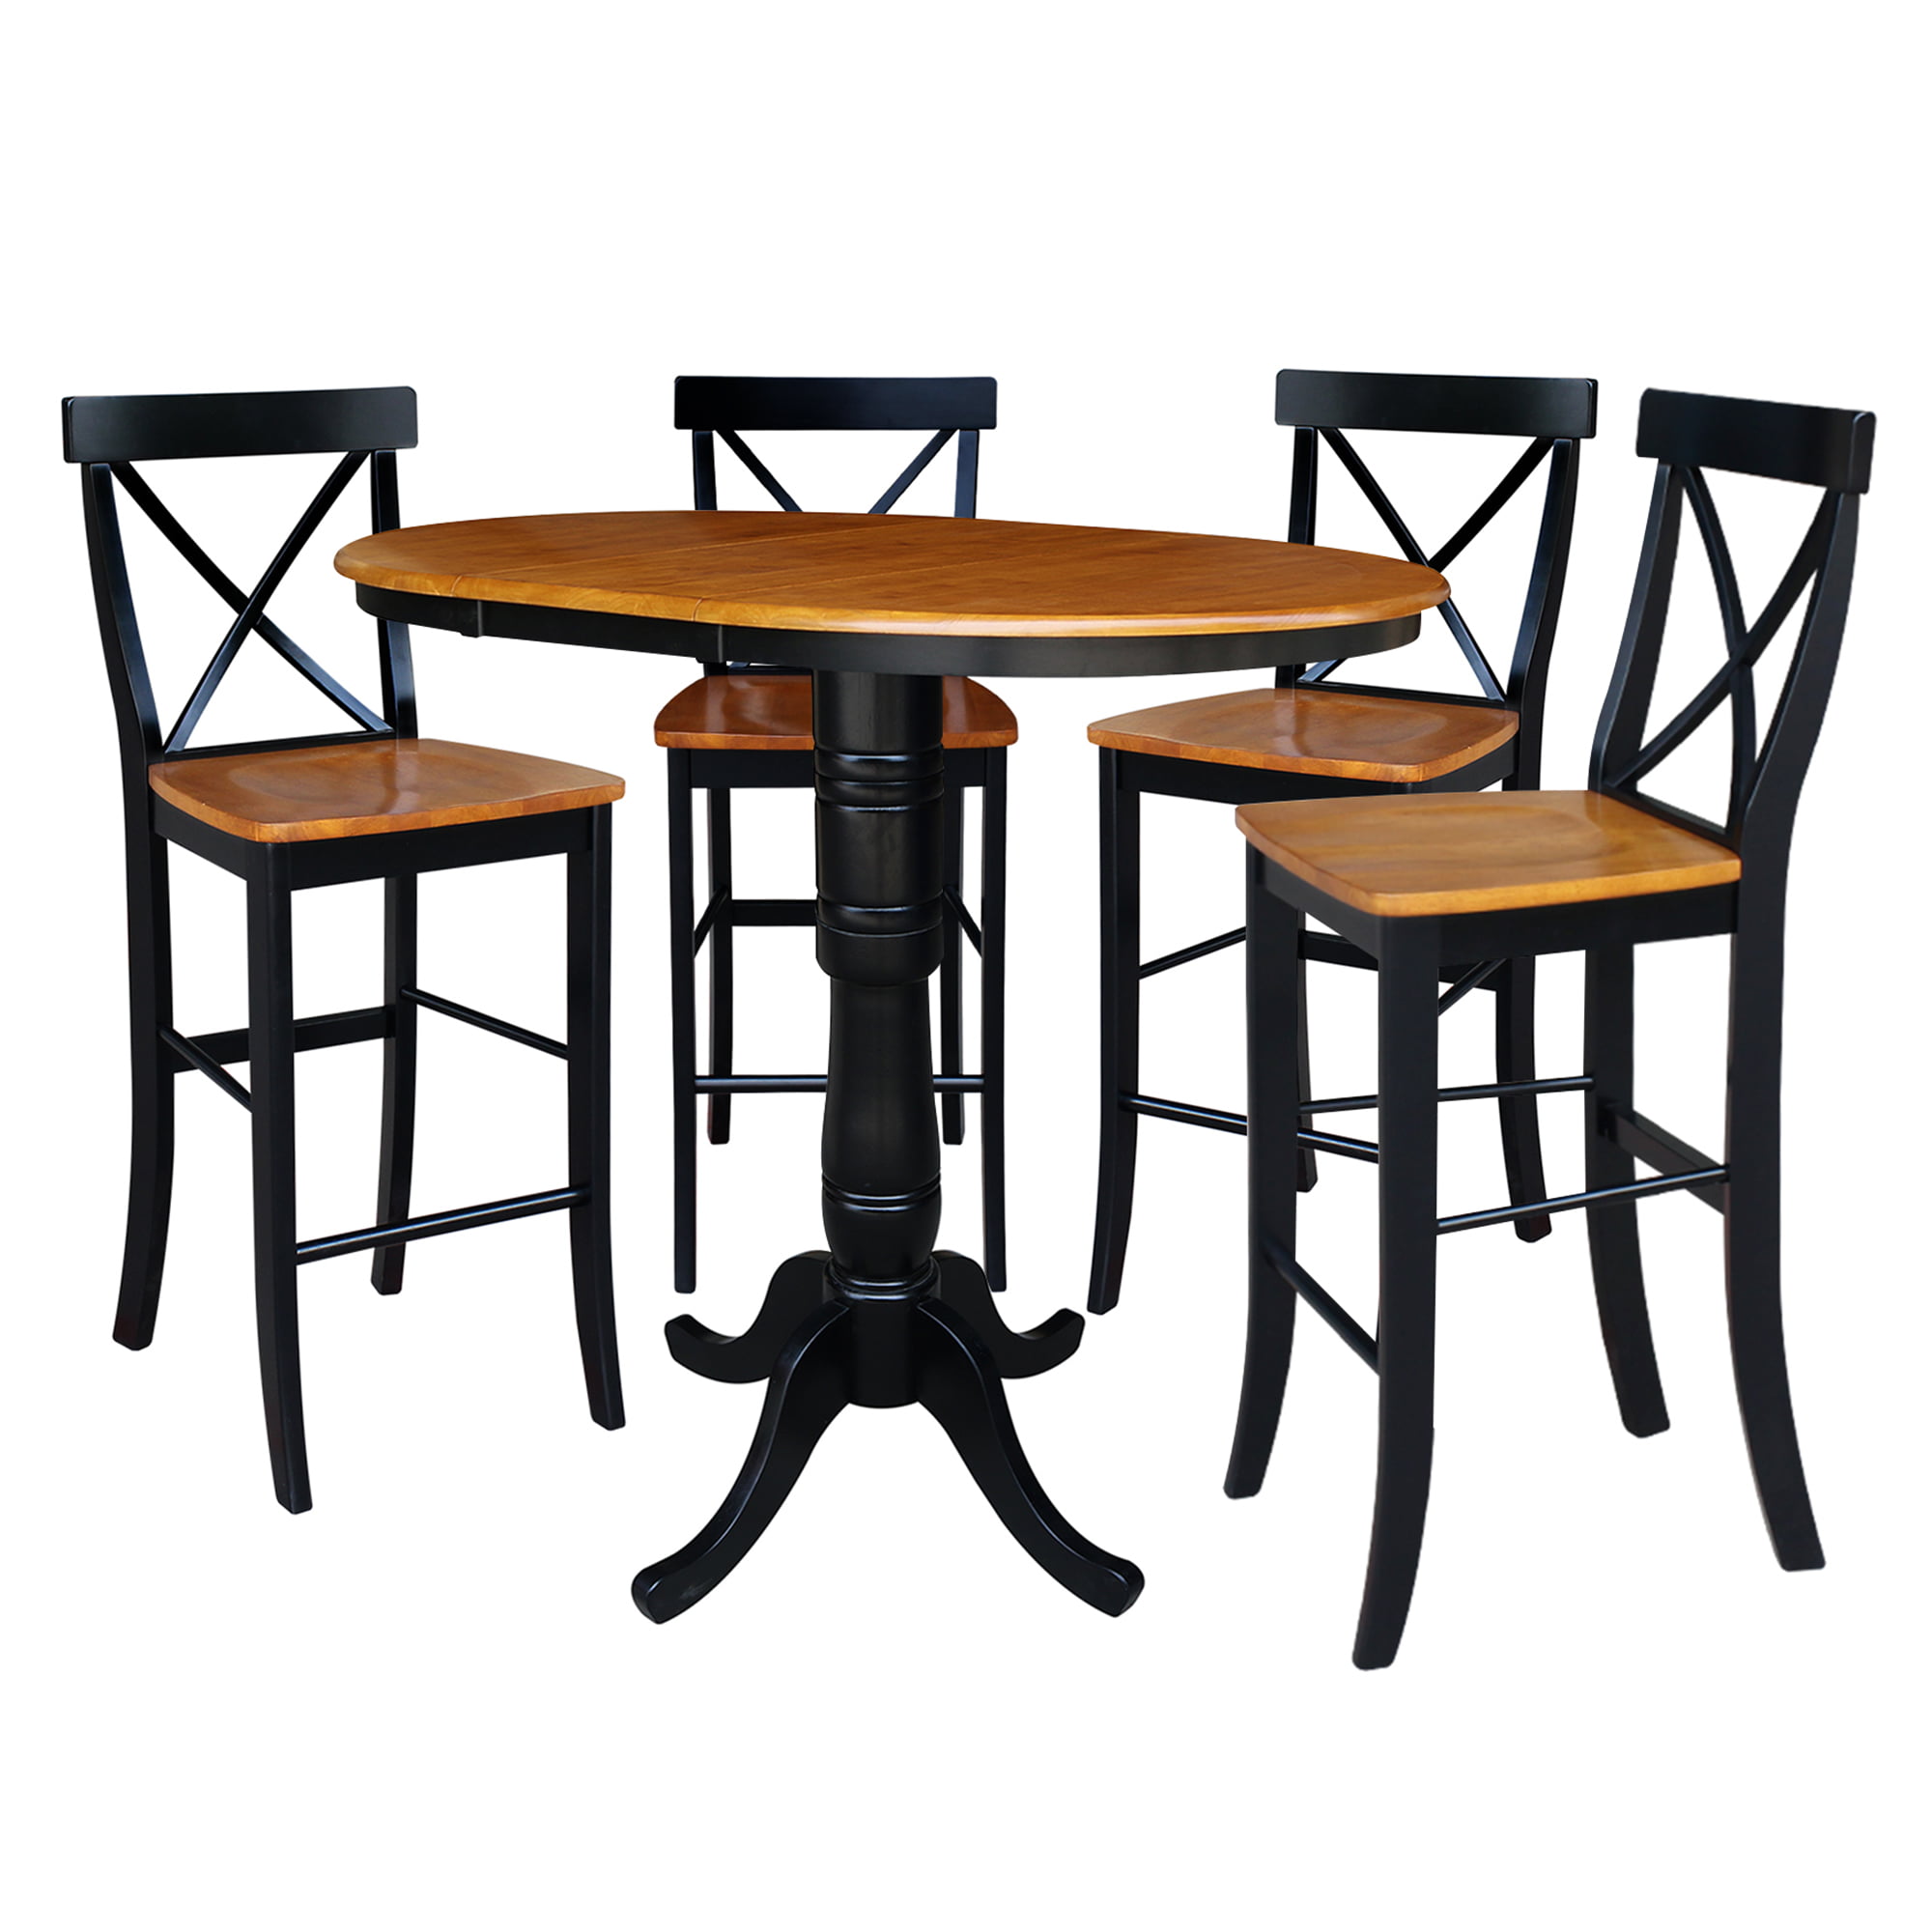 36" Round Bar Height Table with 12" Leaf and 4 X-back Stools - Black